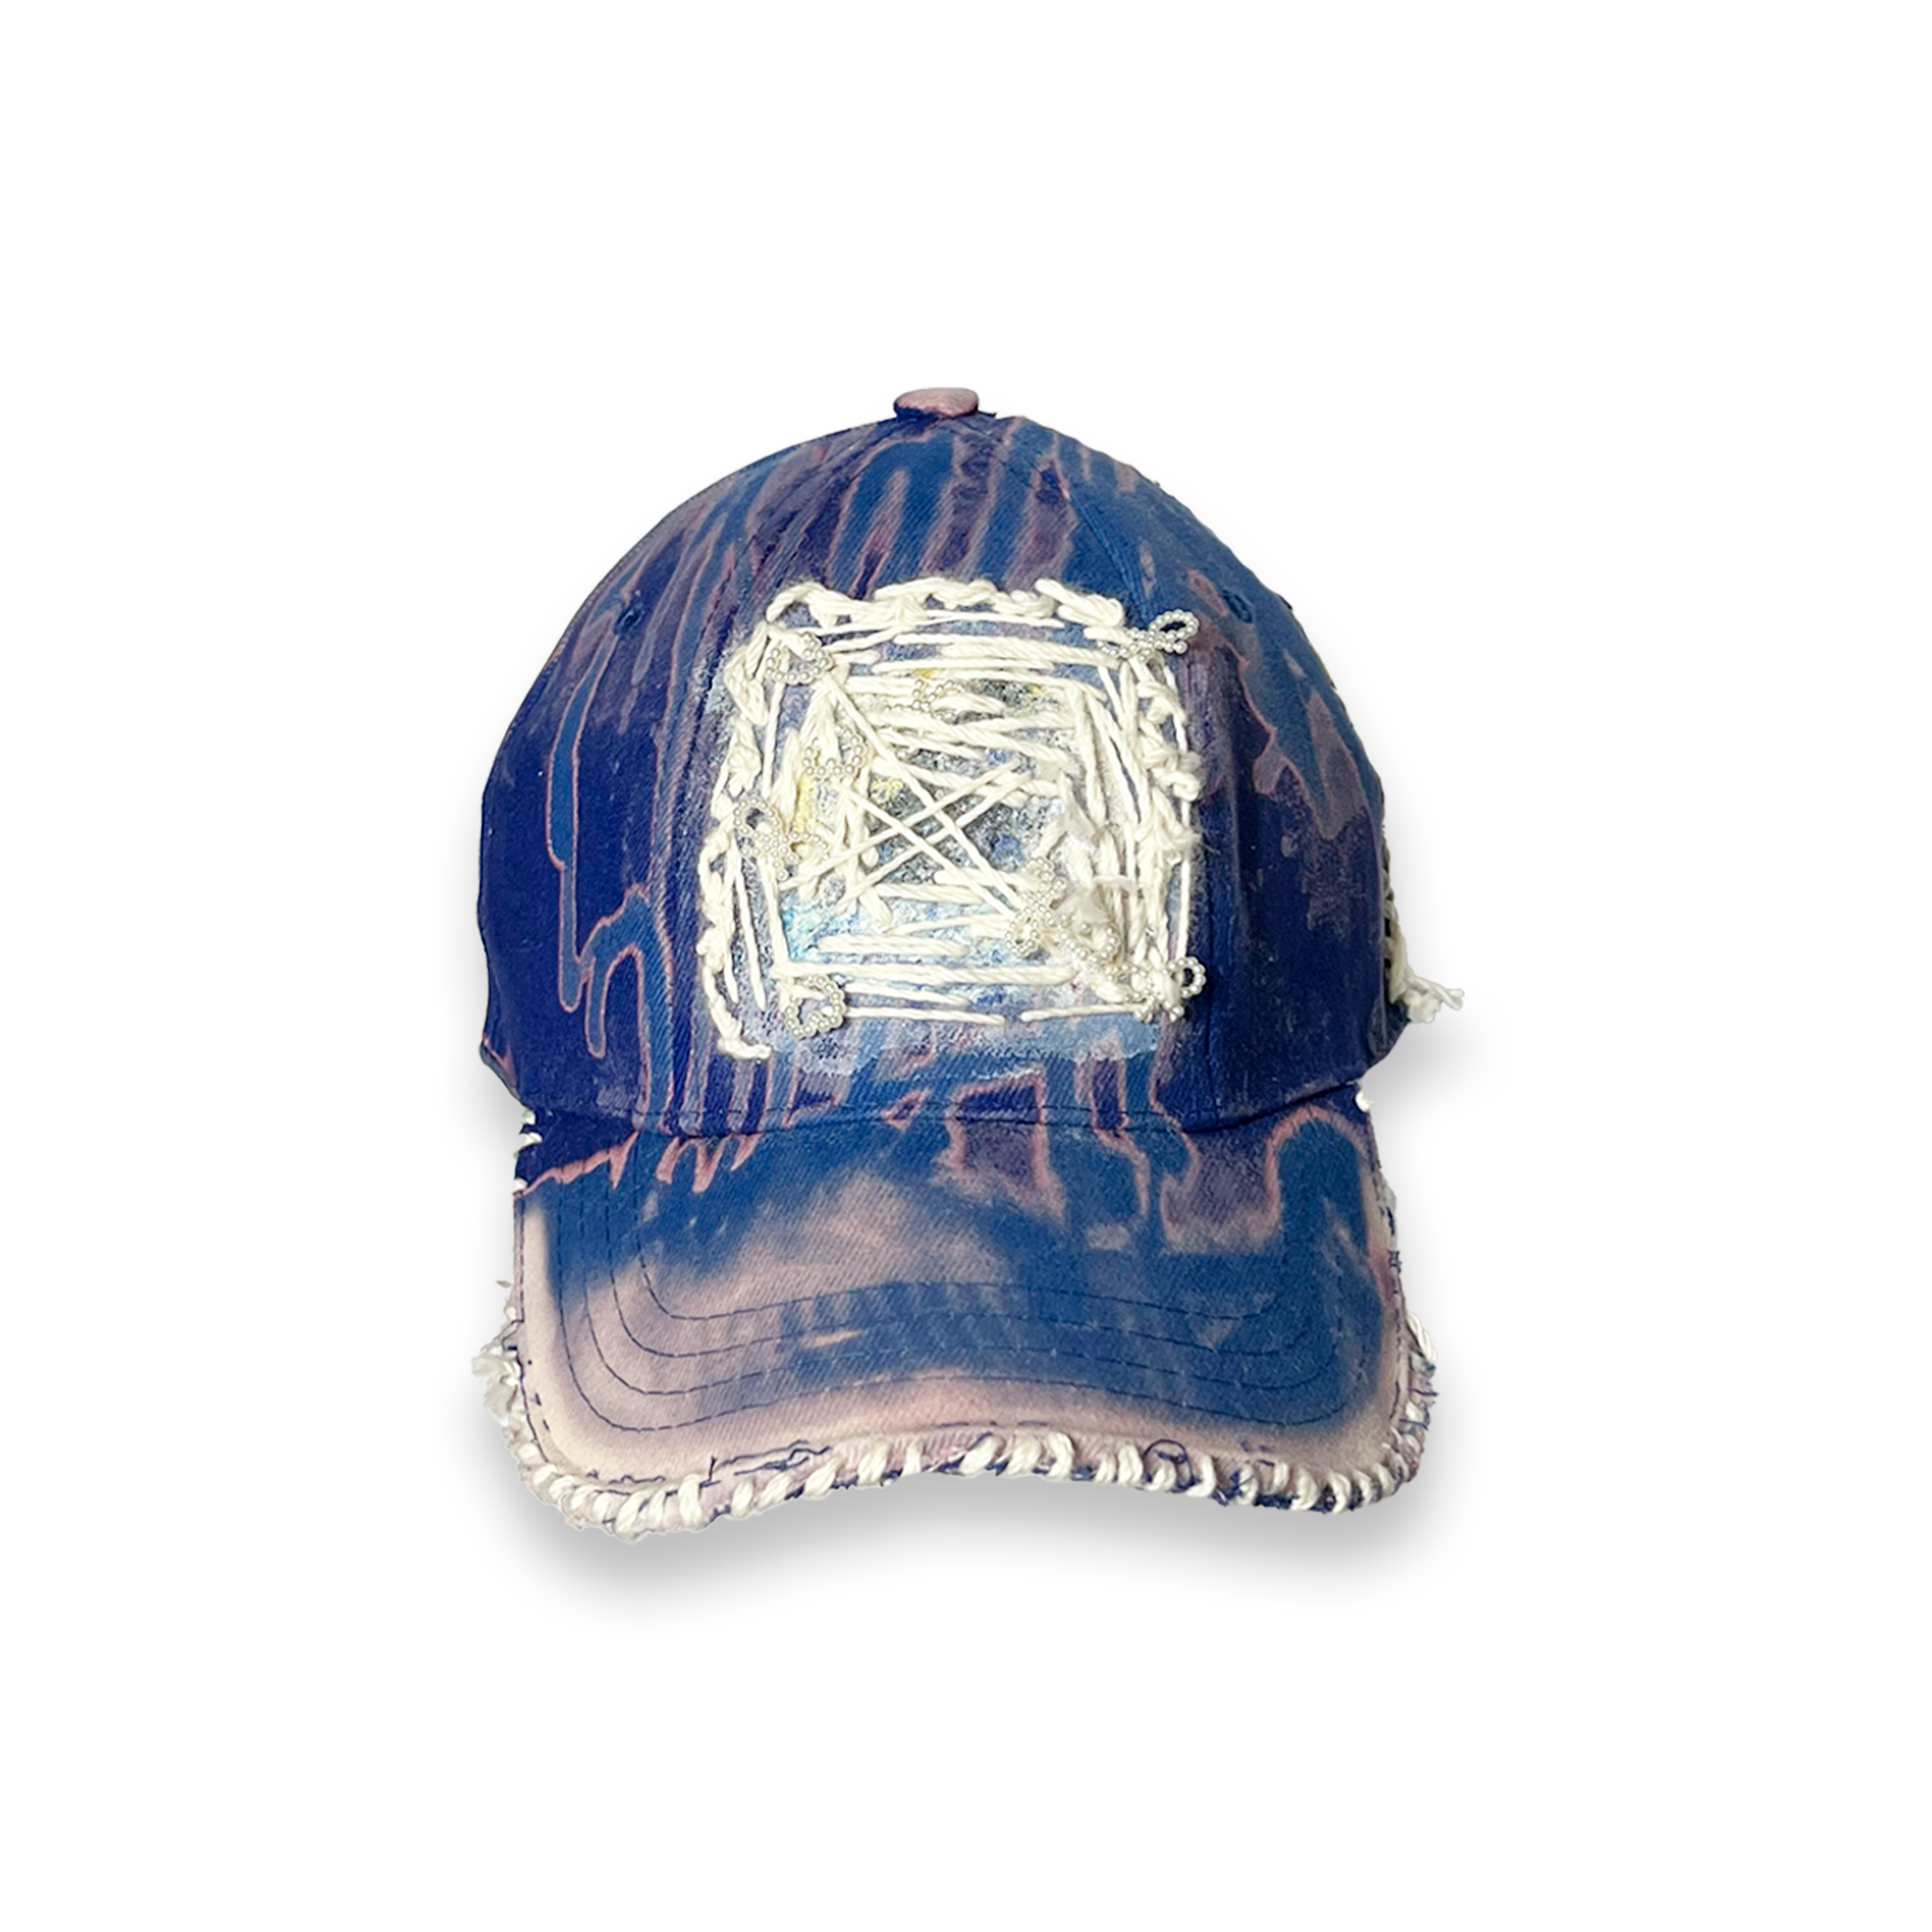 UPCYCLED CAP - KNIT ME